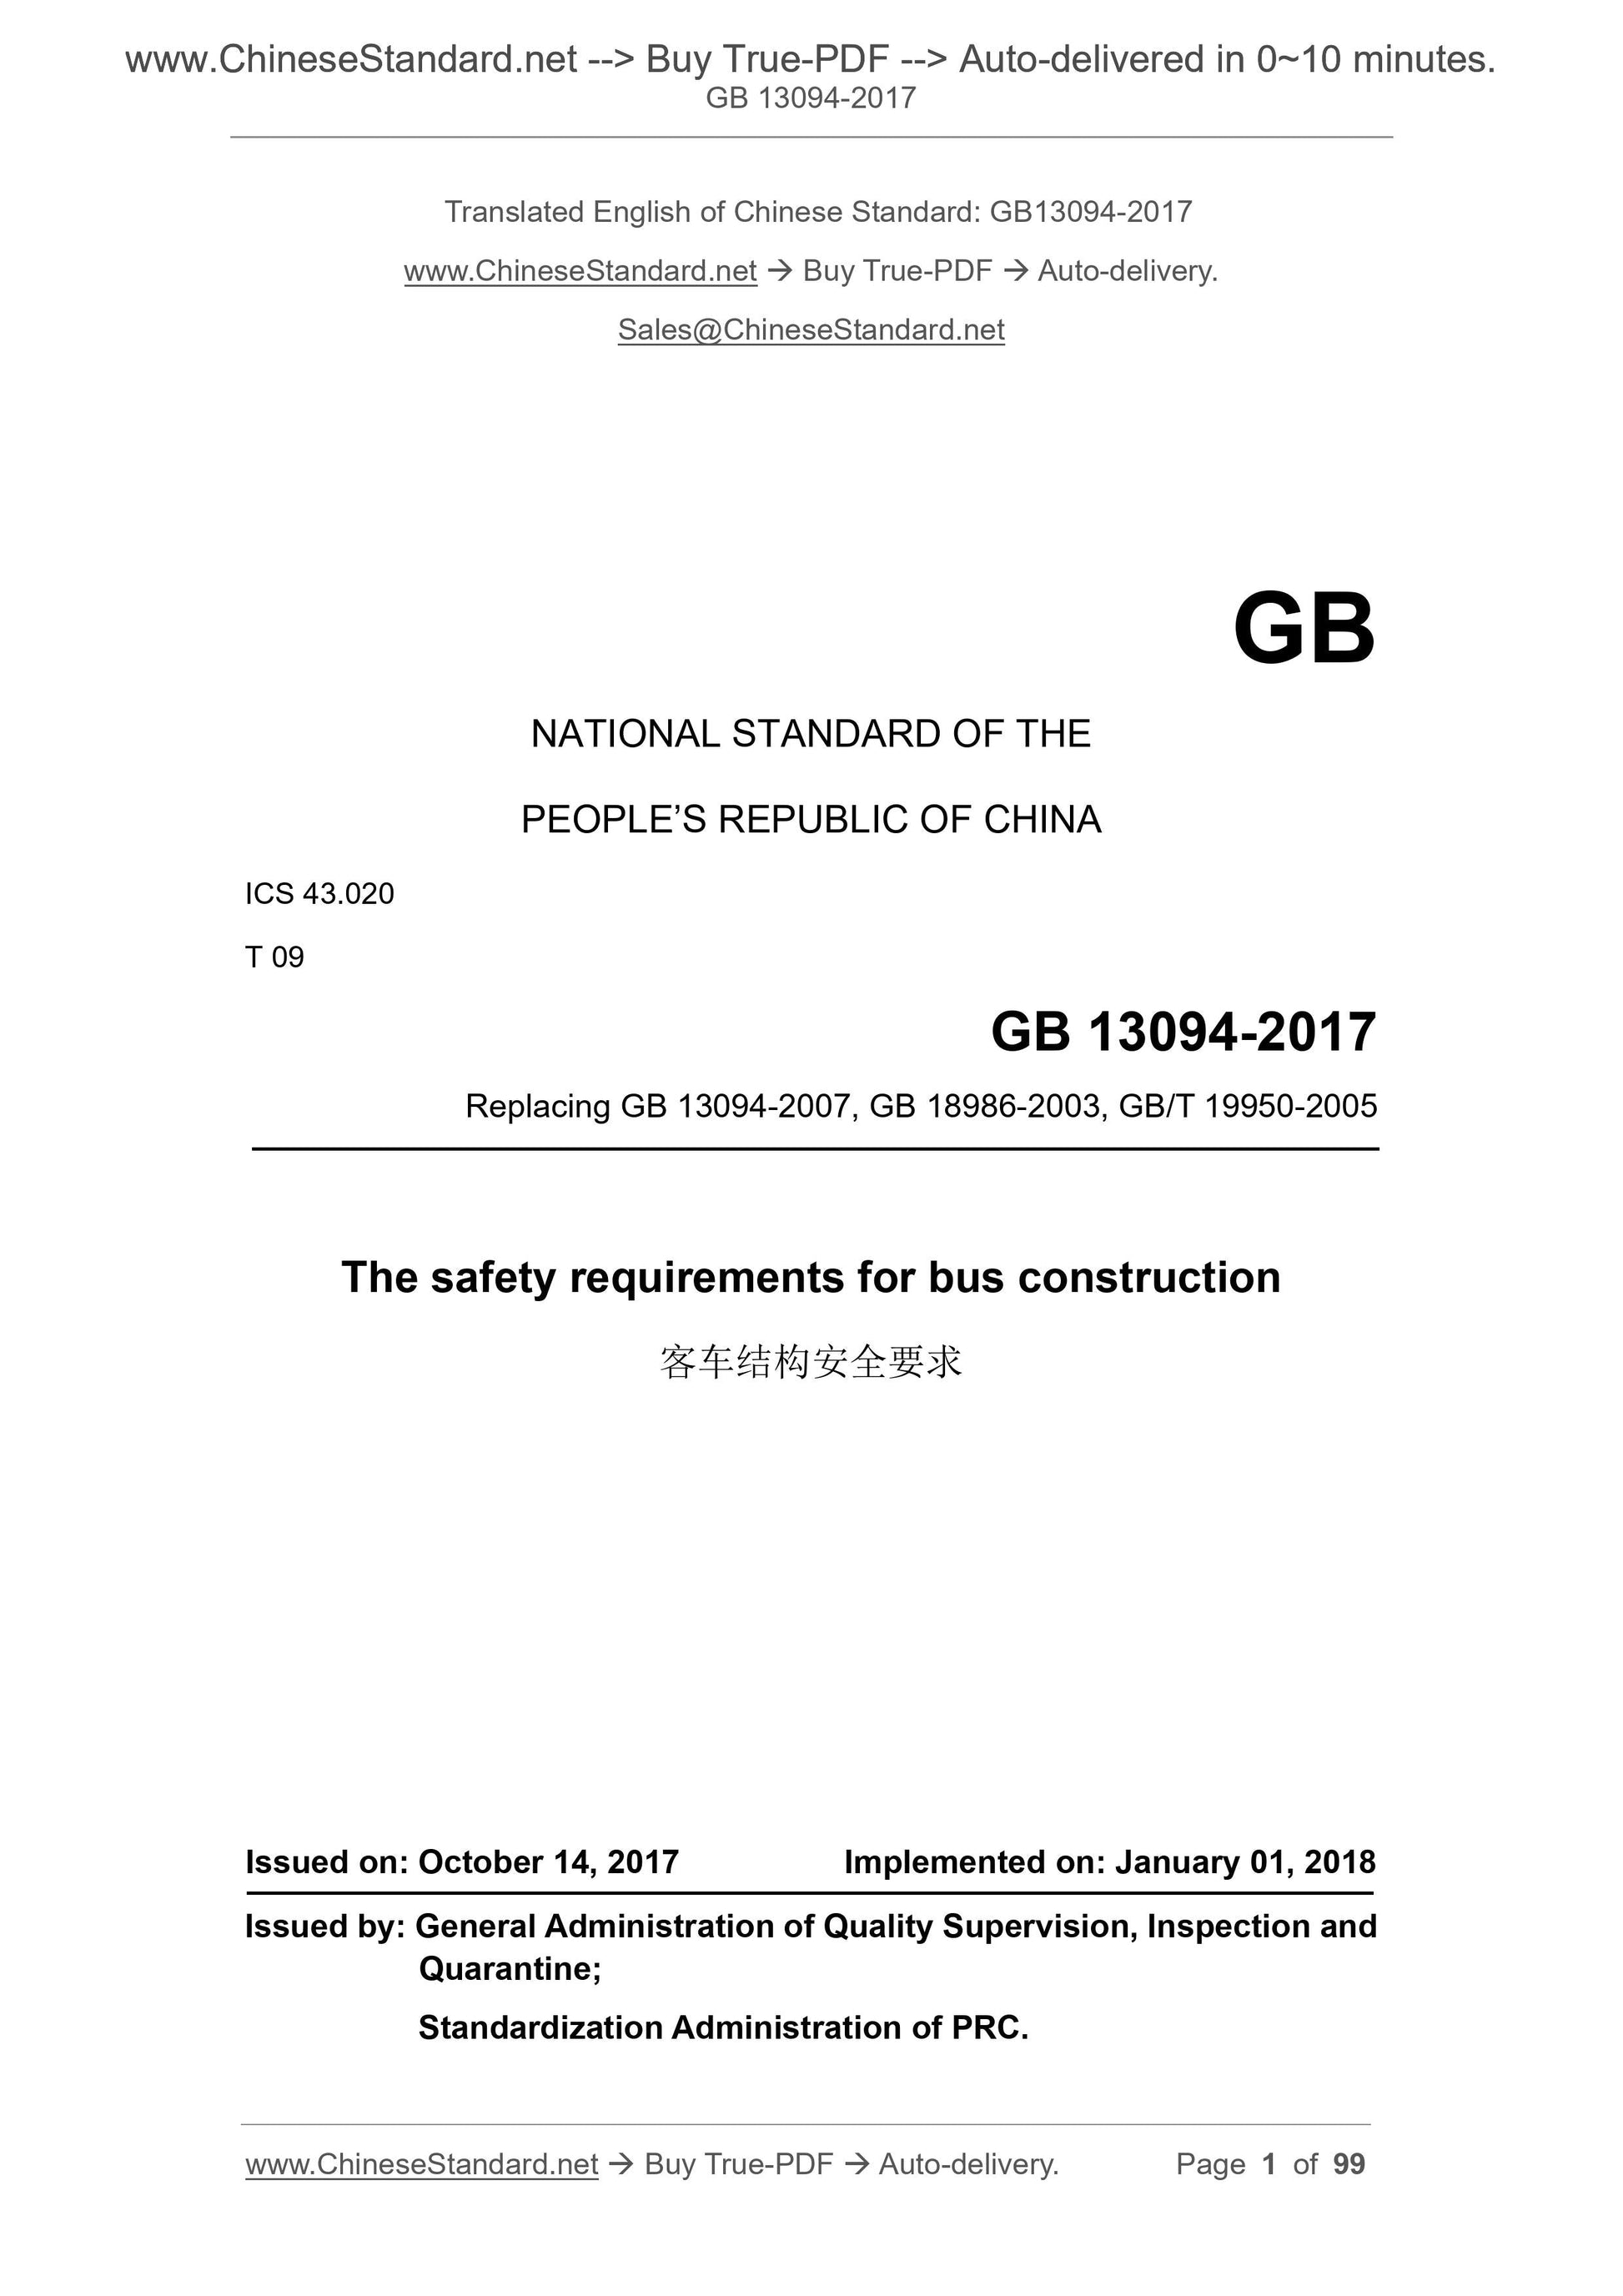 GB 13094-2017 Page 1